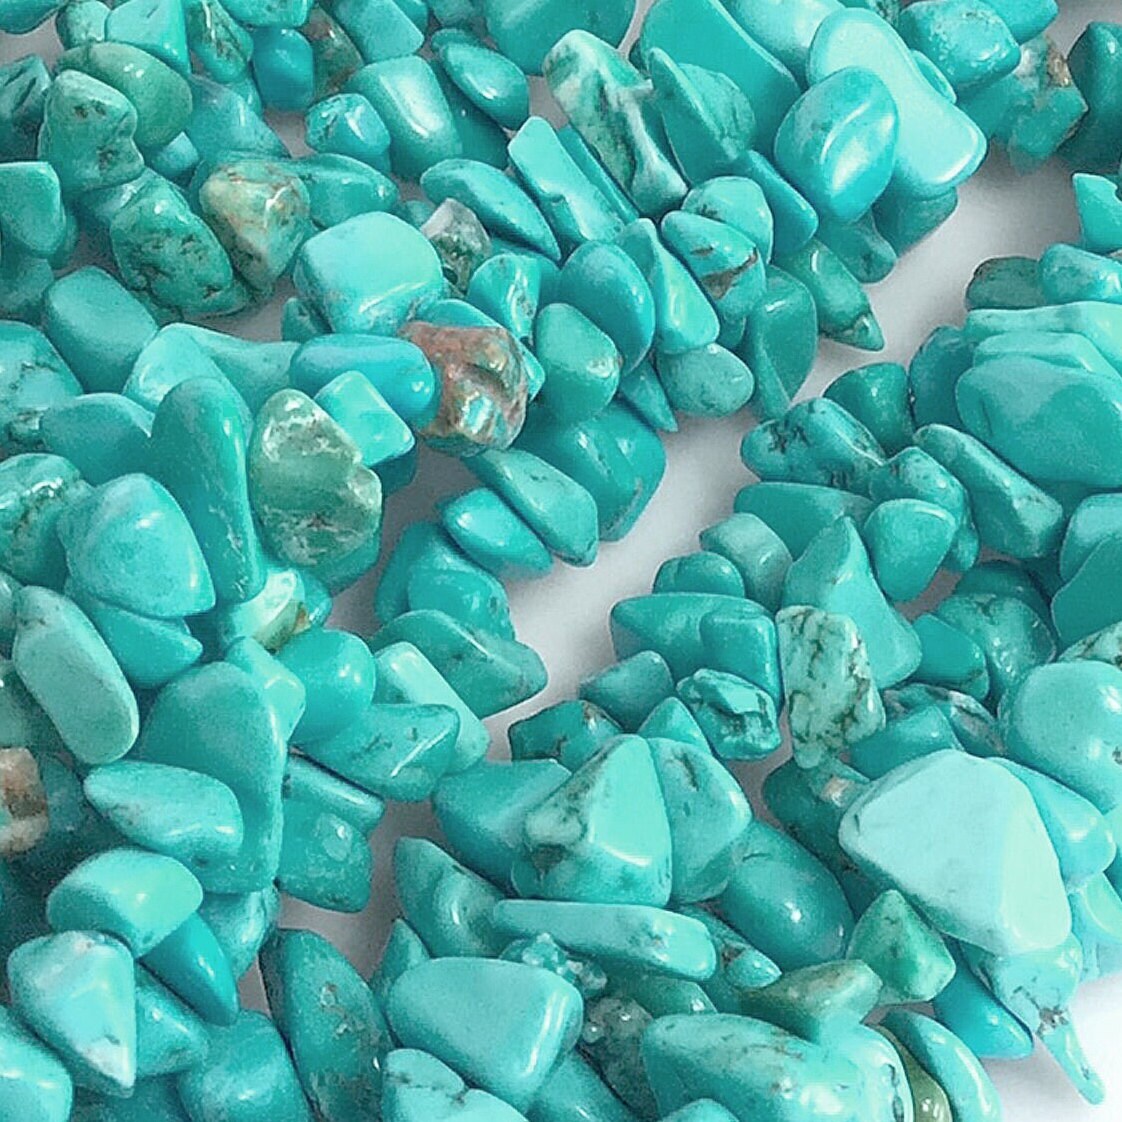 3-5mm Super Tiny Sea Glass Chips Green Turquoise Jewelry Making Supplies  Mosaic Miniature Glass Crafts Glass Micro Decorating Glass Mini 